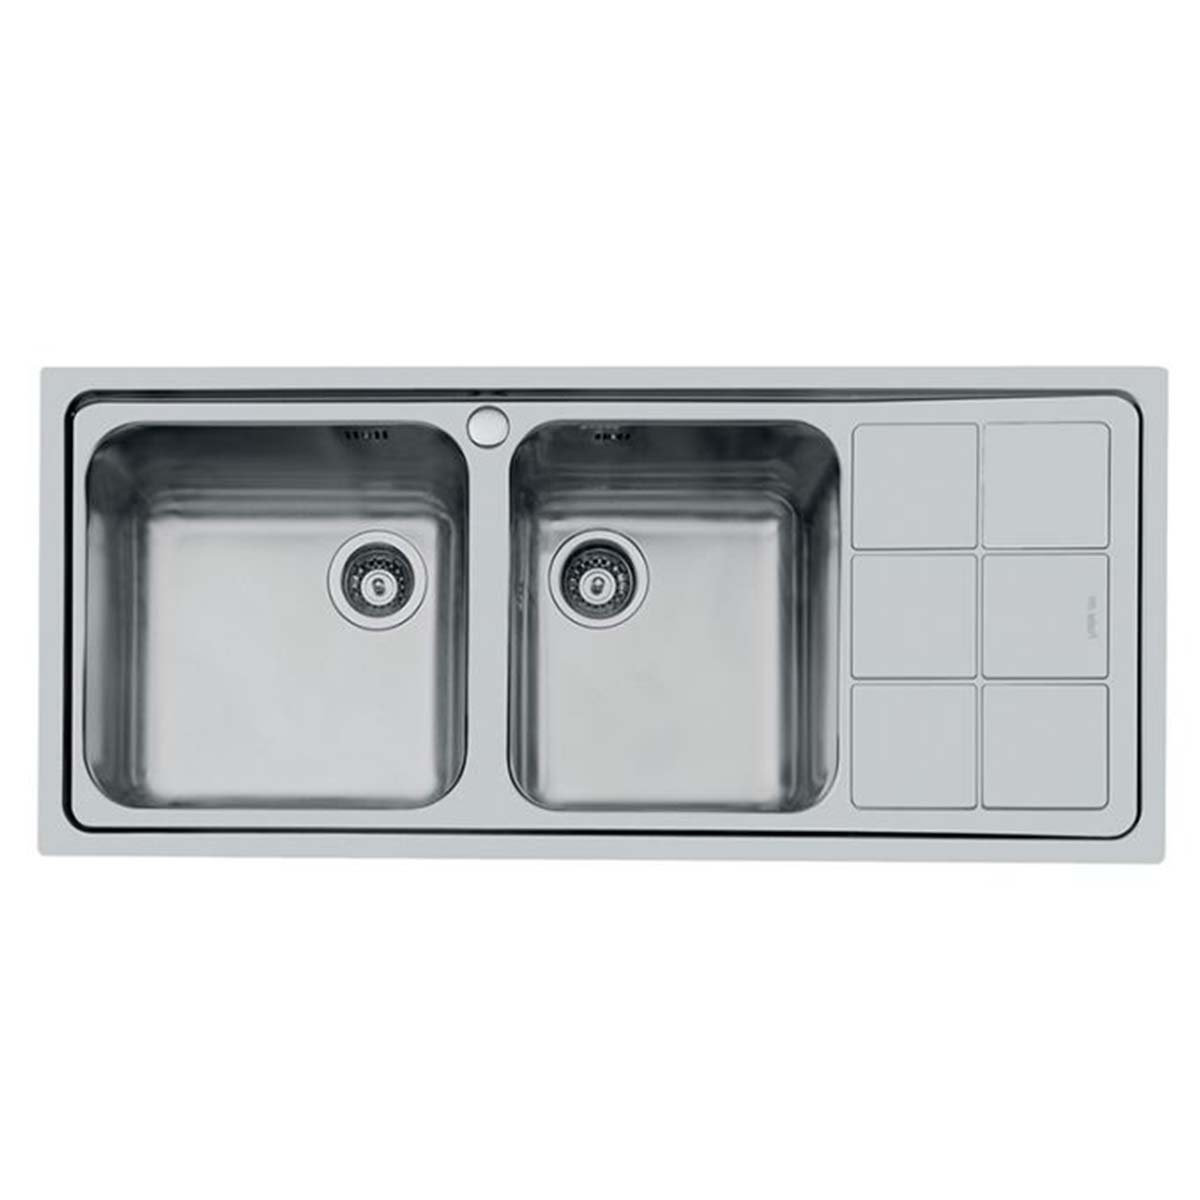 Foster S3000 Double Kitchen Sink with Drainer Brushed Stainless Steel Right Handed